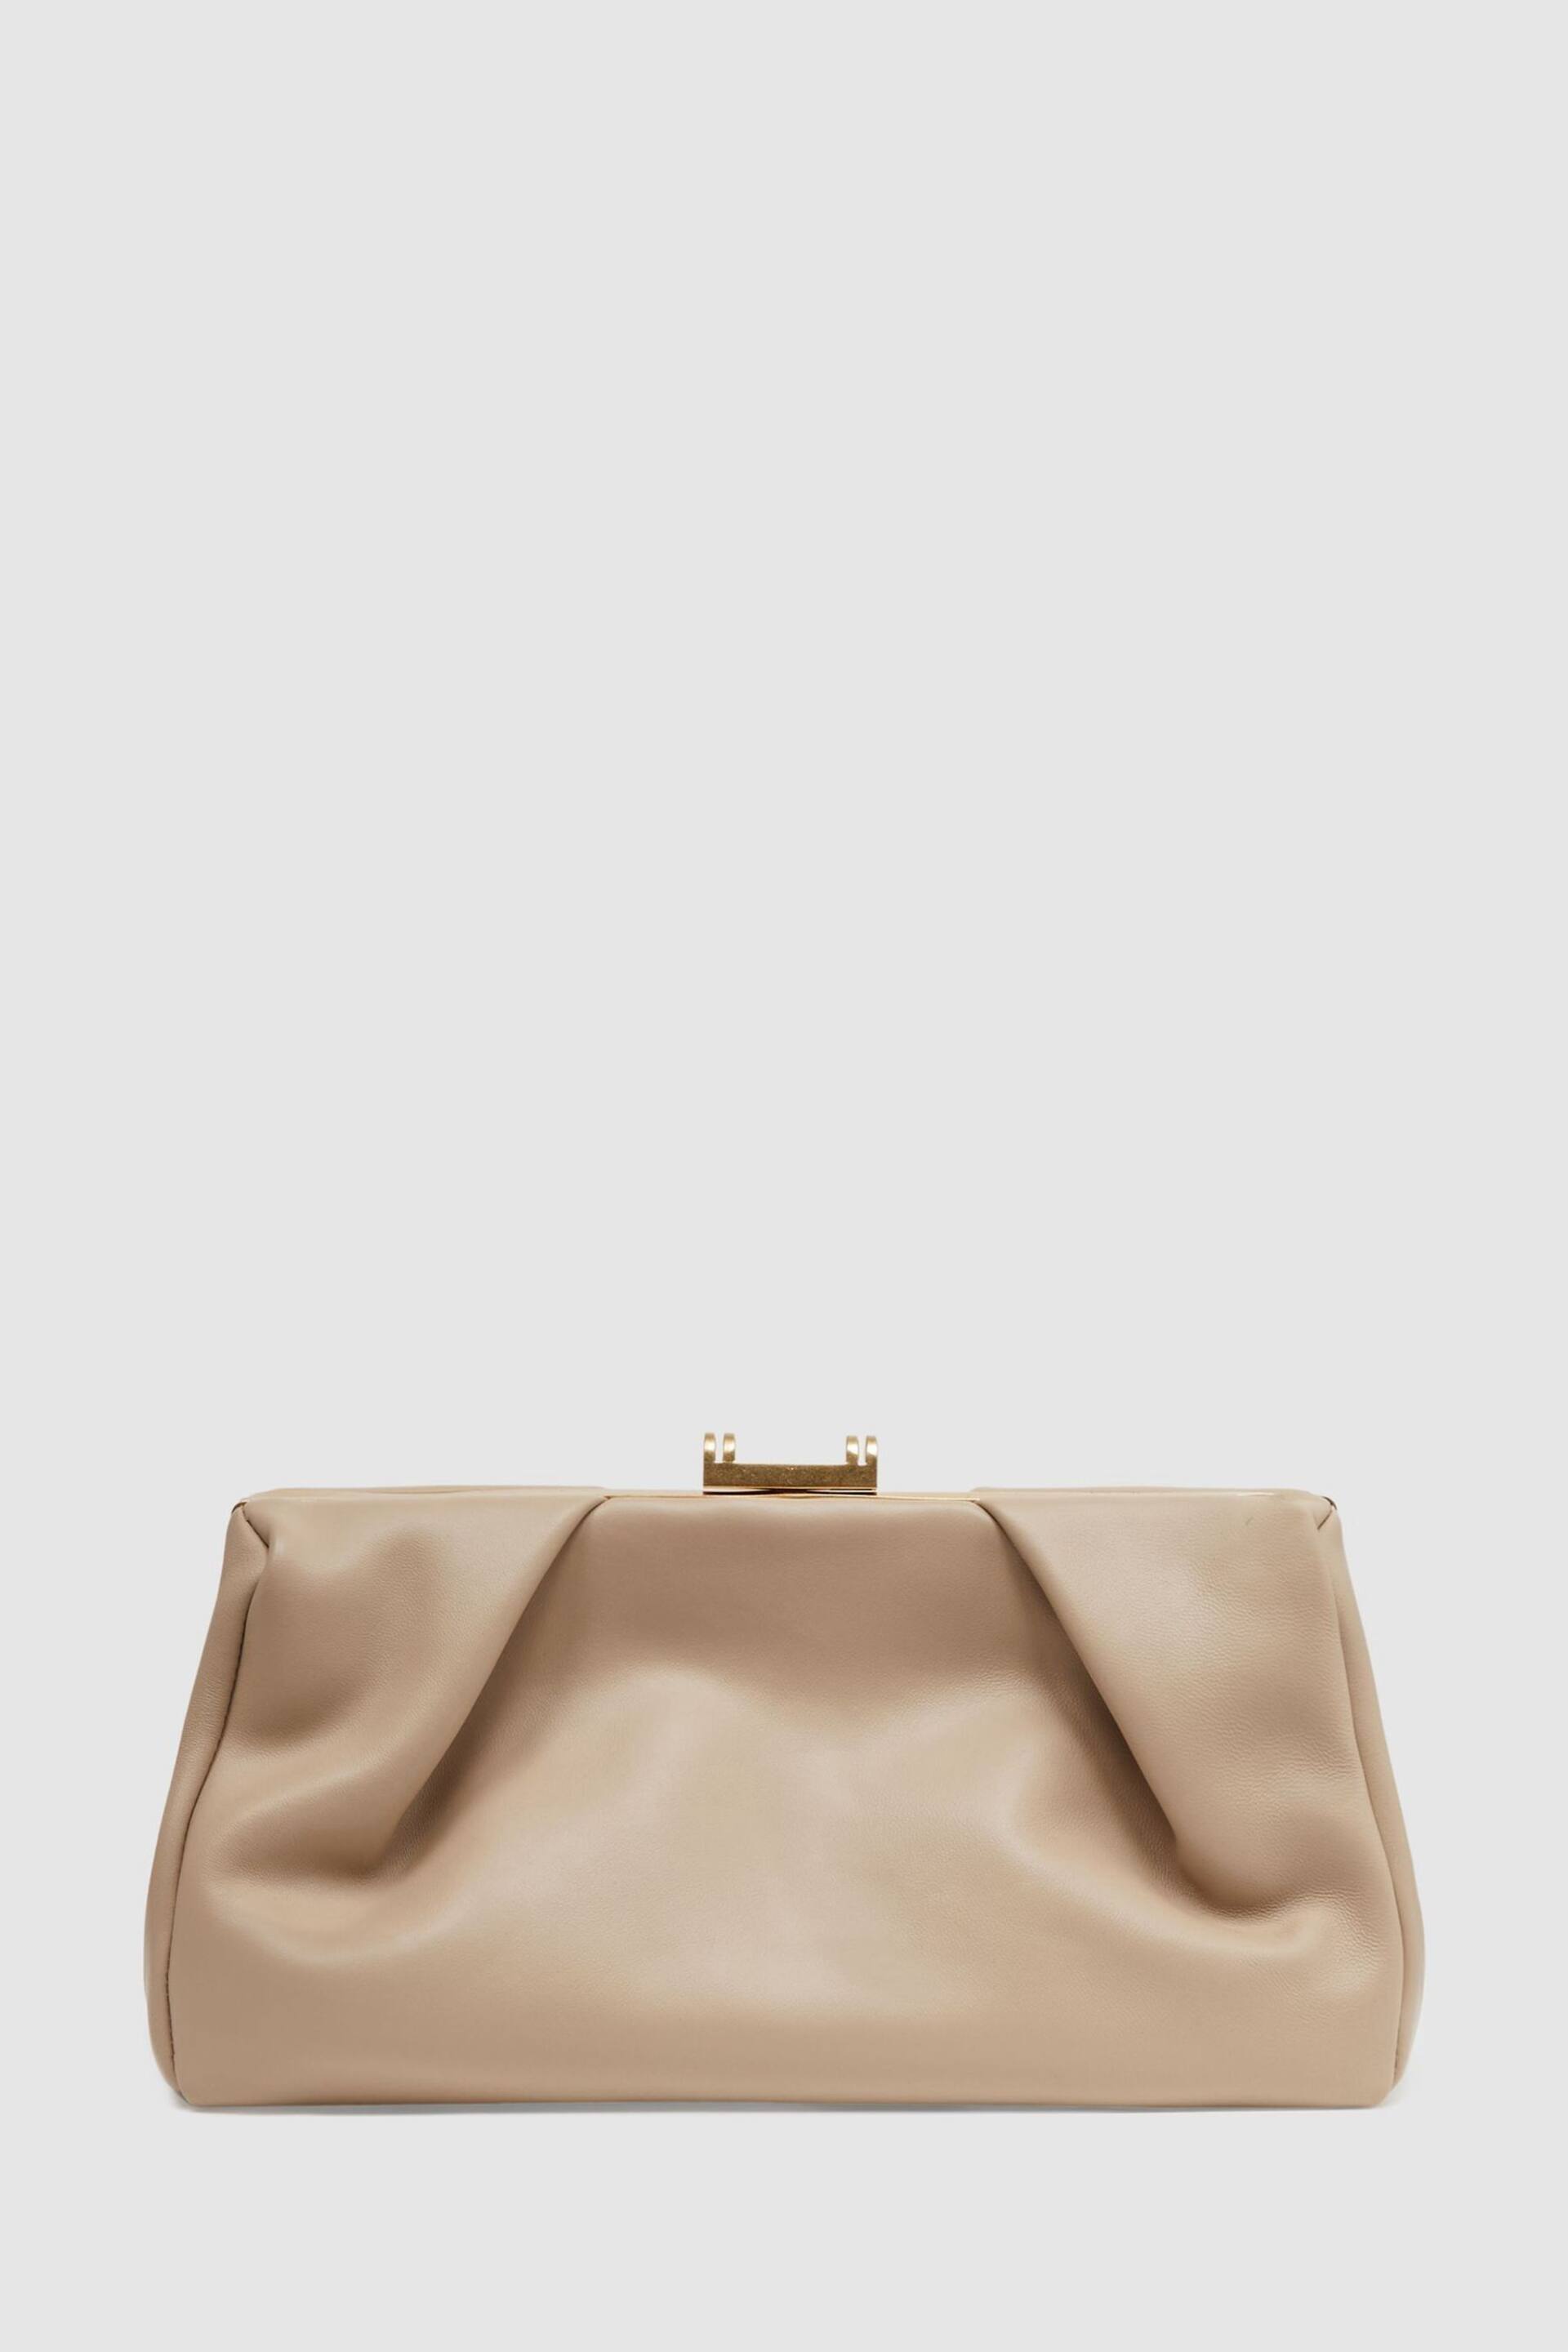 Reiss Taupe Madison Leather Clutch Bag - Image 4 of 5